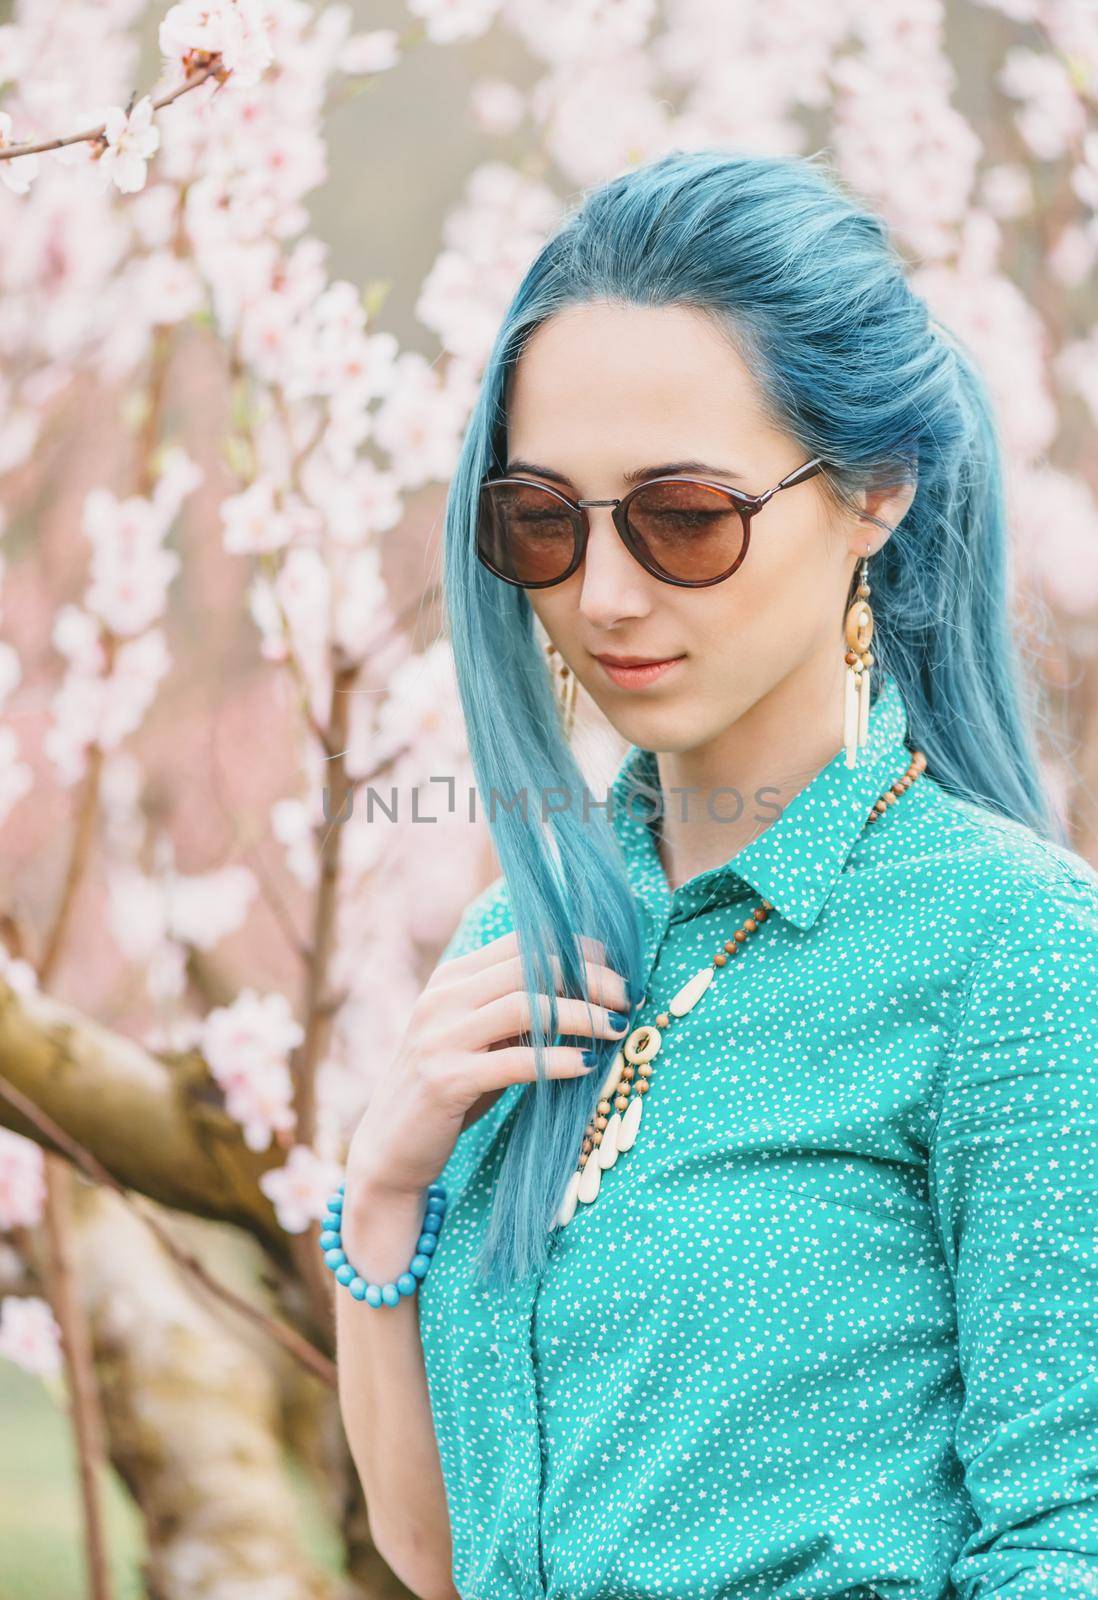 Beautiful young woman with blue hair walking in blossoming peach tree garden in spring.